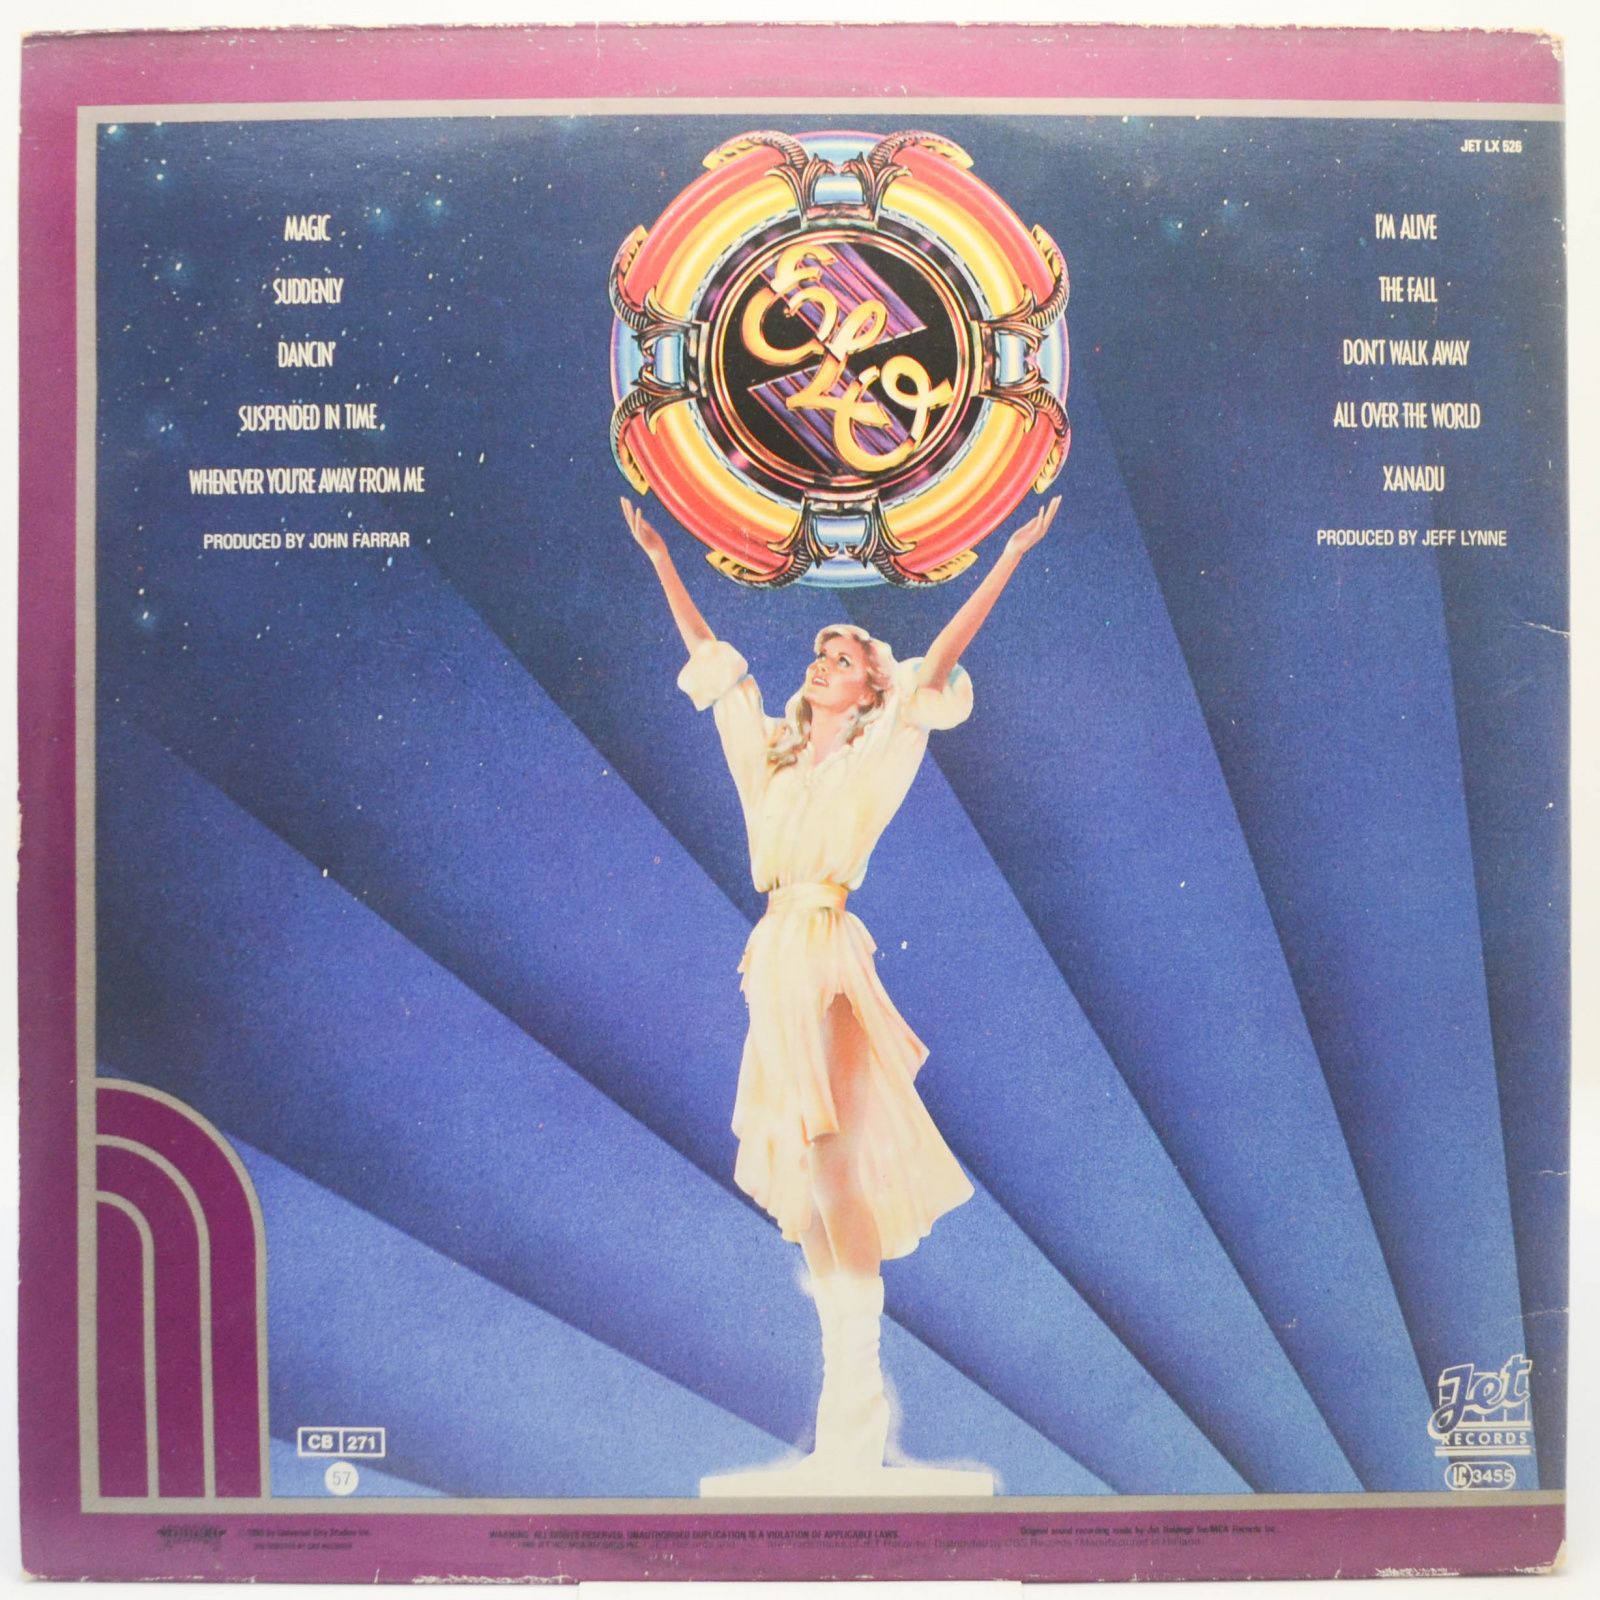 Electric Light Orchestra / Olivia Newton-John — Xanadu (From The Original Motion Picture Soundtrack), 1980